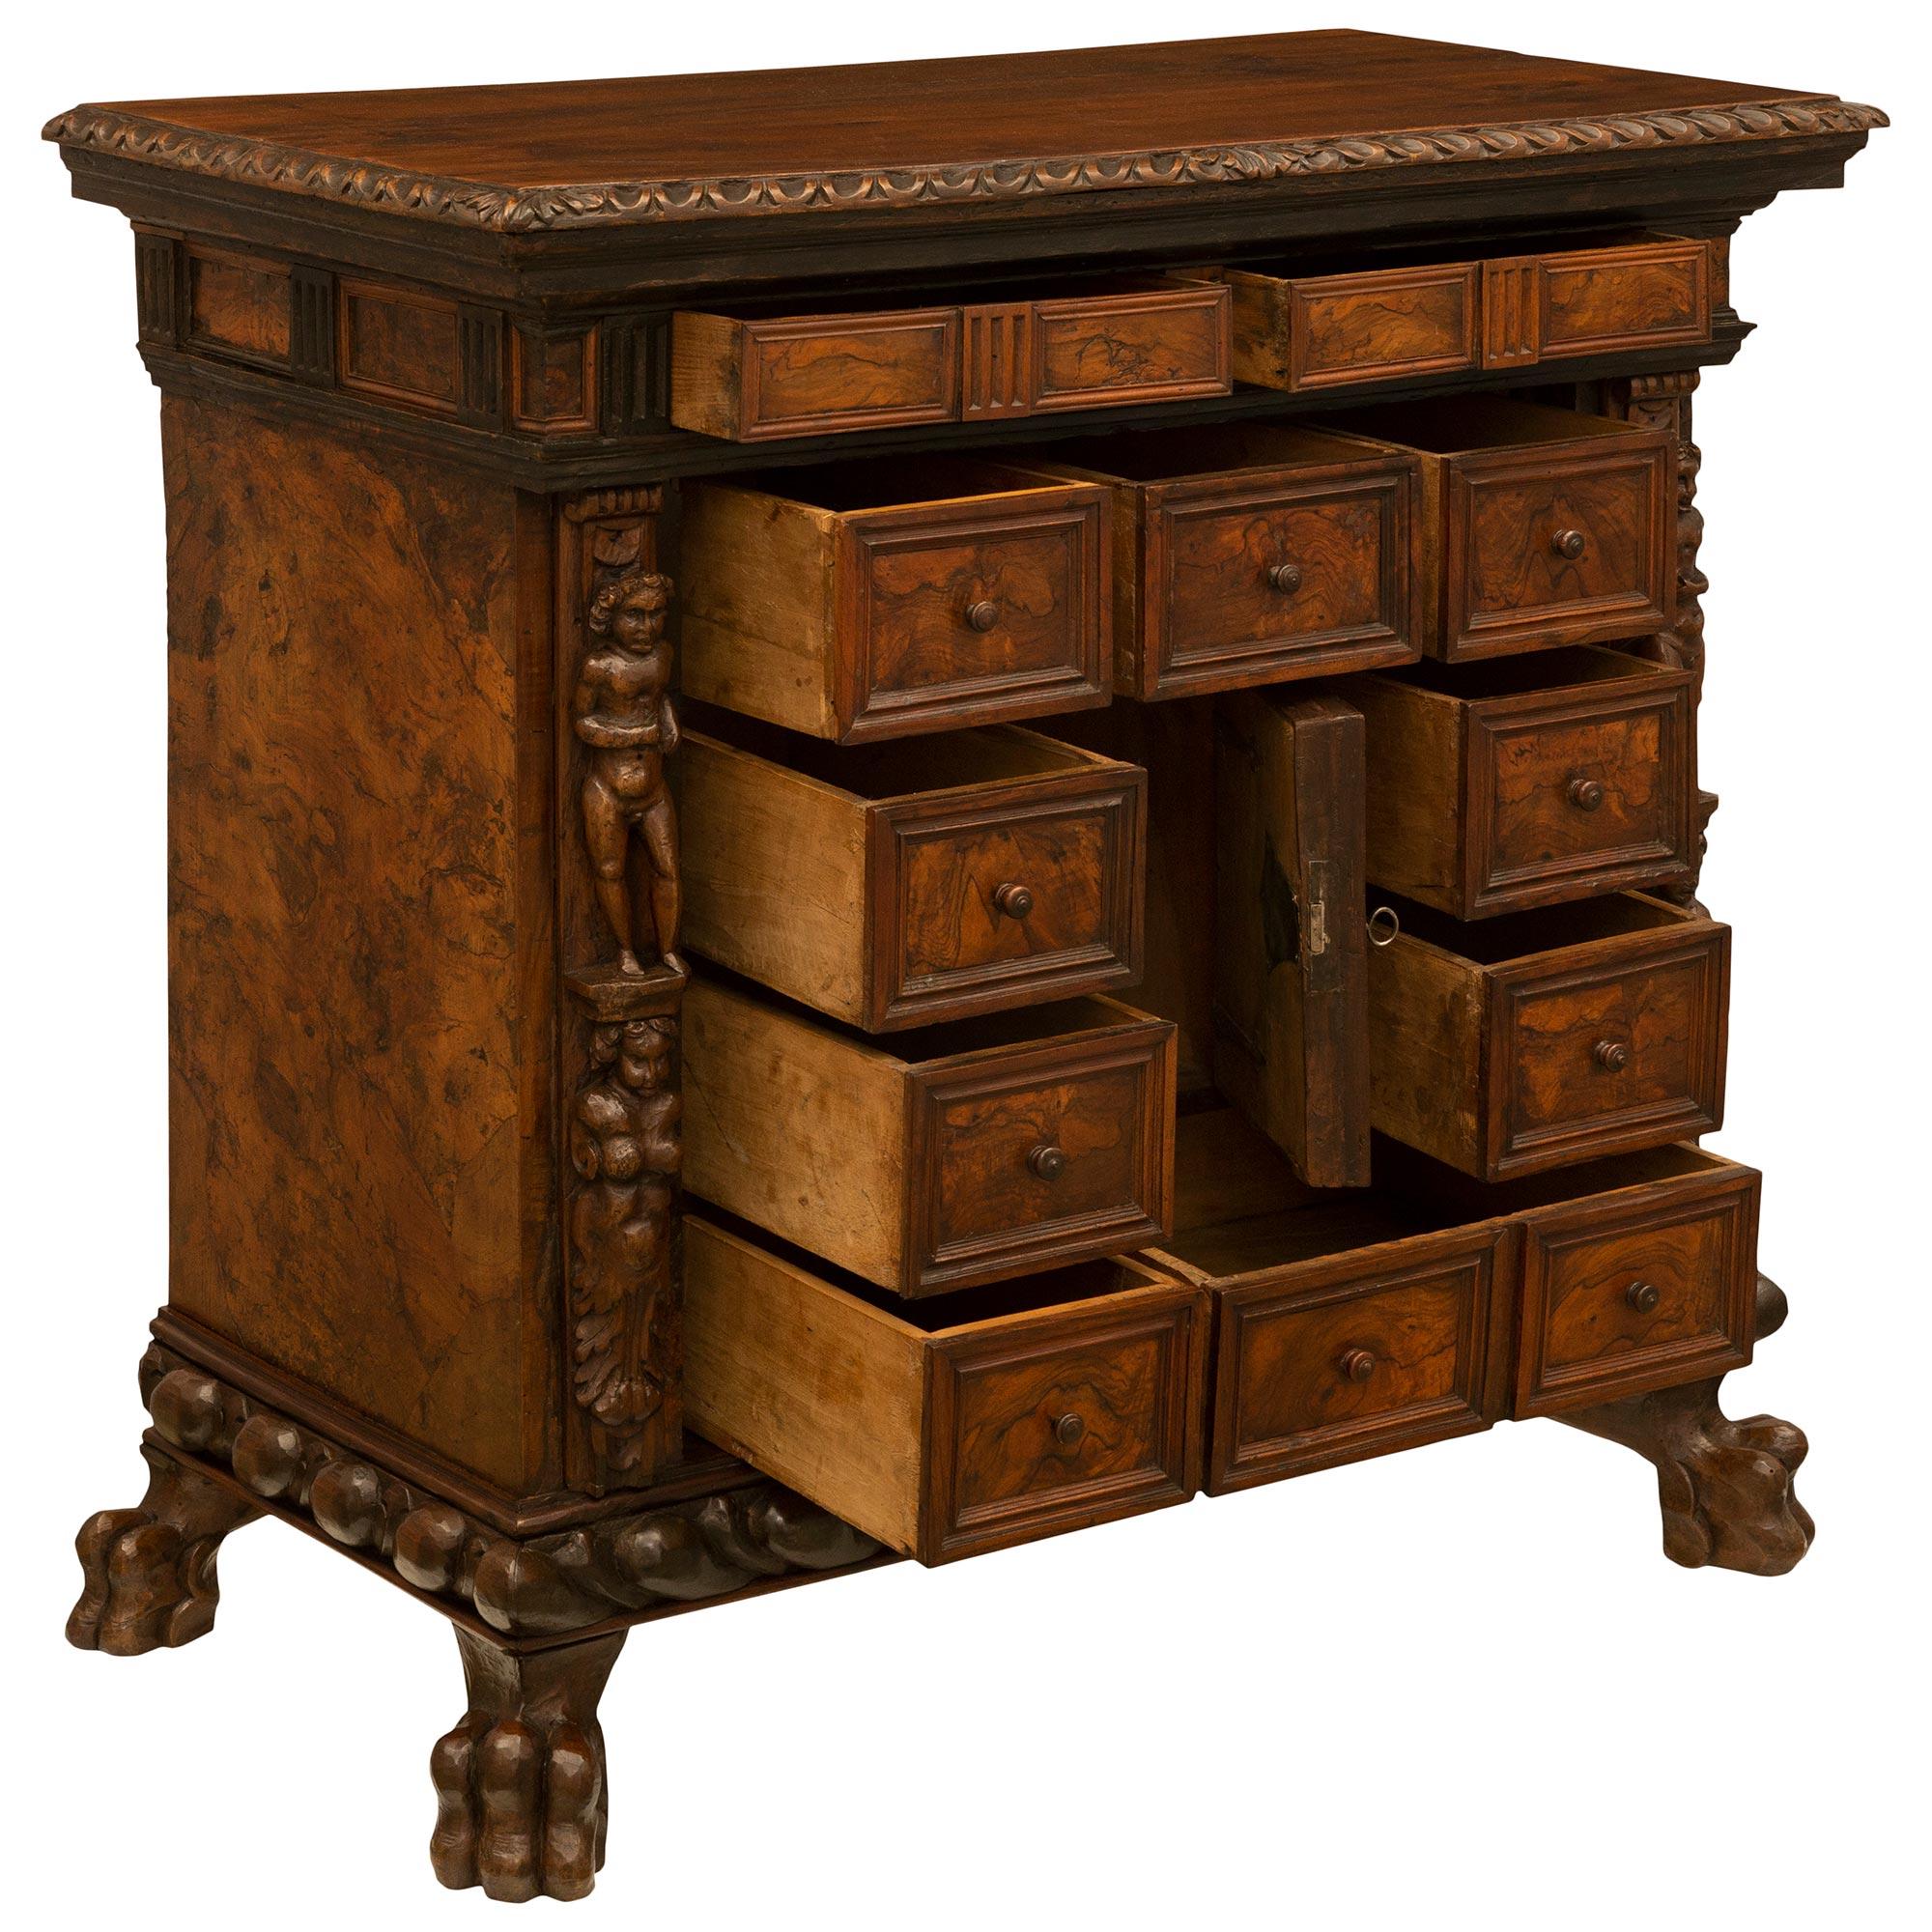 18th Century and Earlier Italian 17th Century Baroque Period Walnut and Burl Walnut Cabinet For Sale